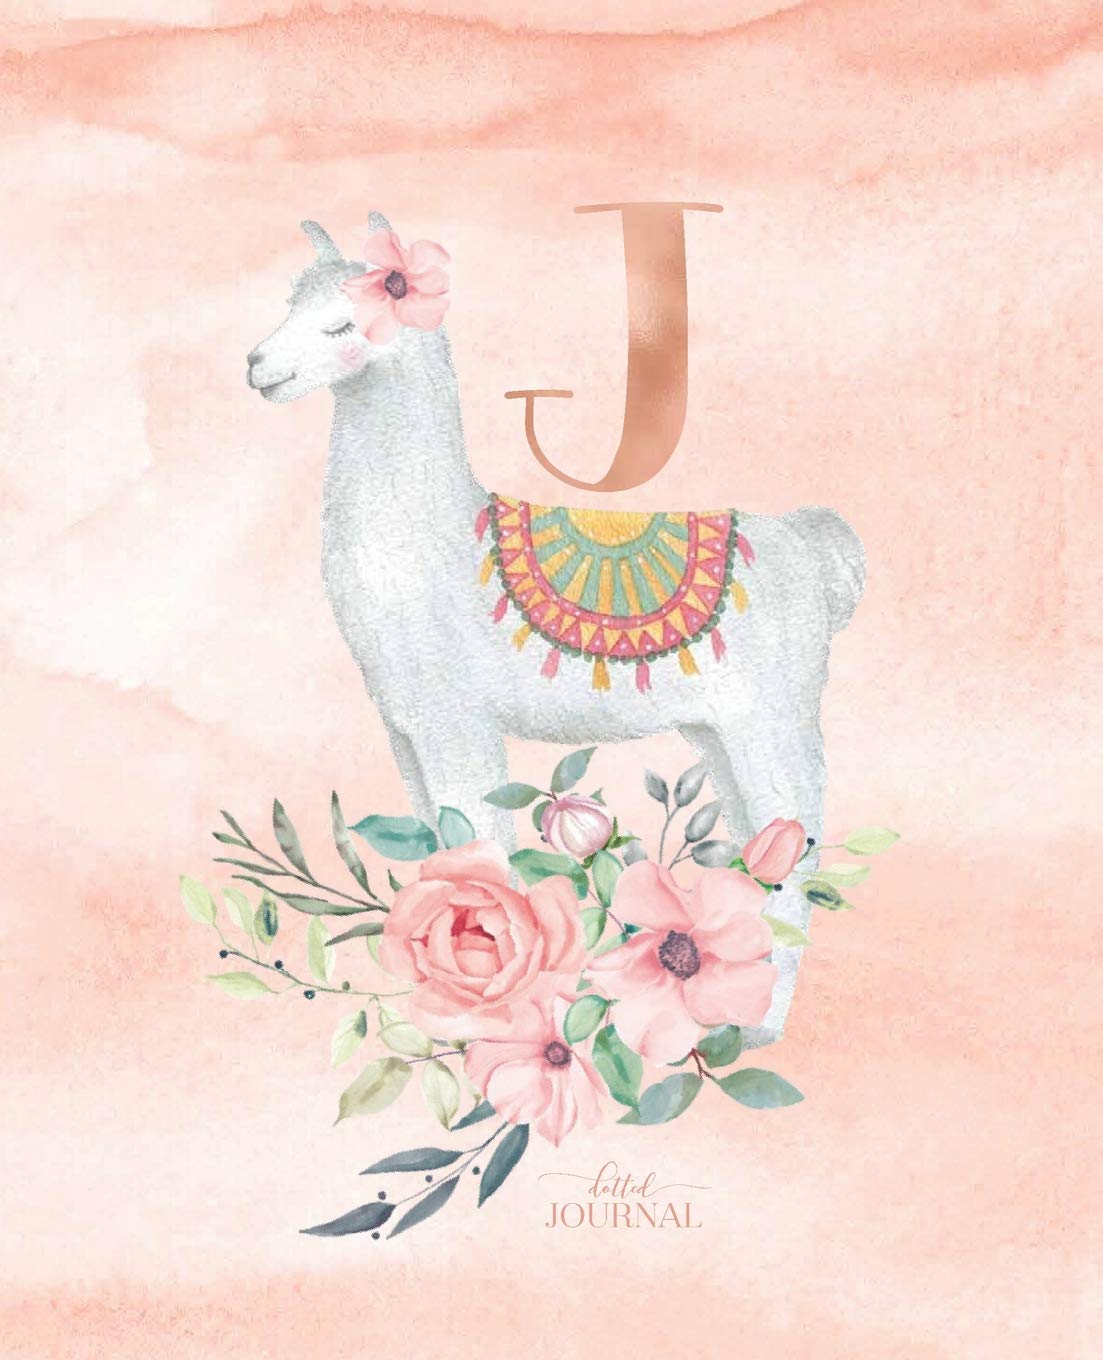 Dotted Journal: Dotted Grid Bullet Notebook Journal Llama Alpaca Rose Gold Monogram Letter J with Pink Flowers (7.5” x 9.25”) for Women Teens Girls and Kids: Cute Little Journals: Books